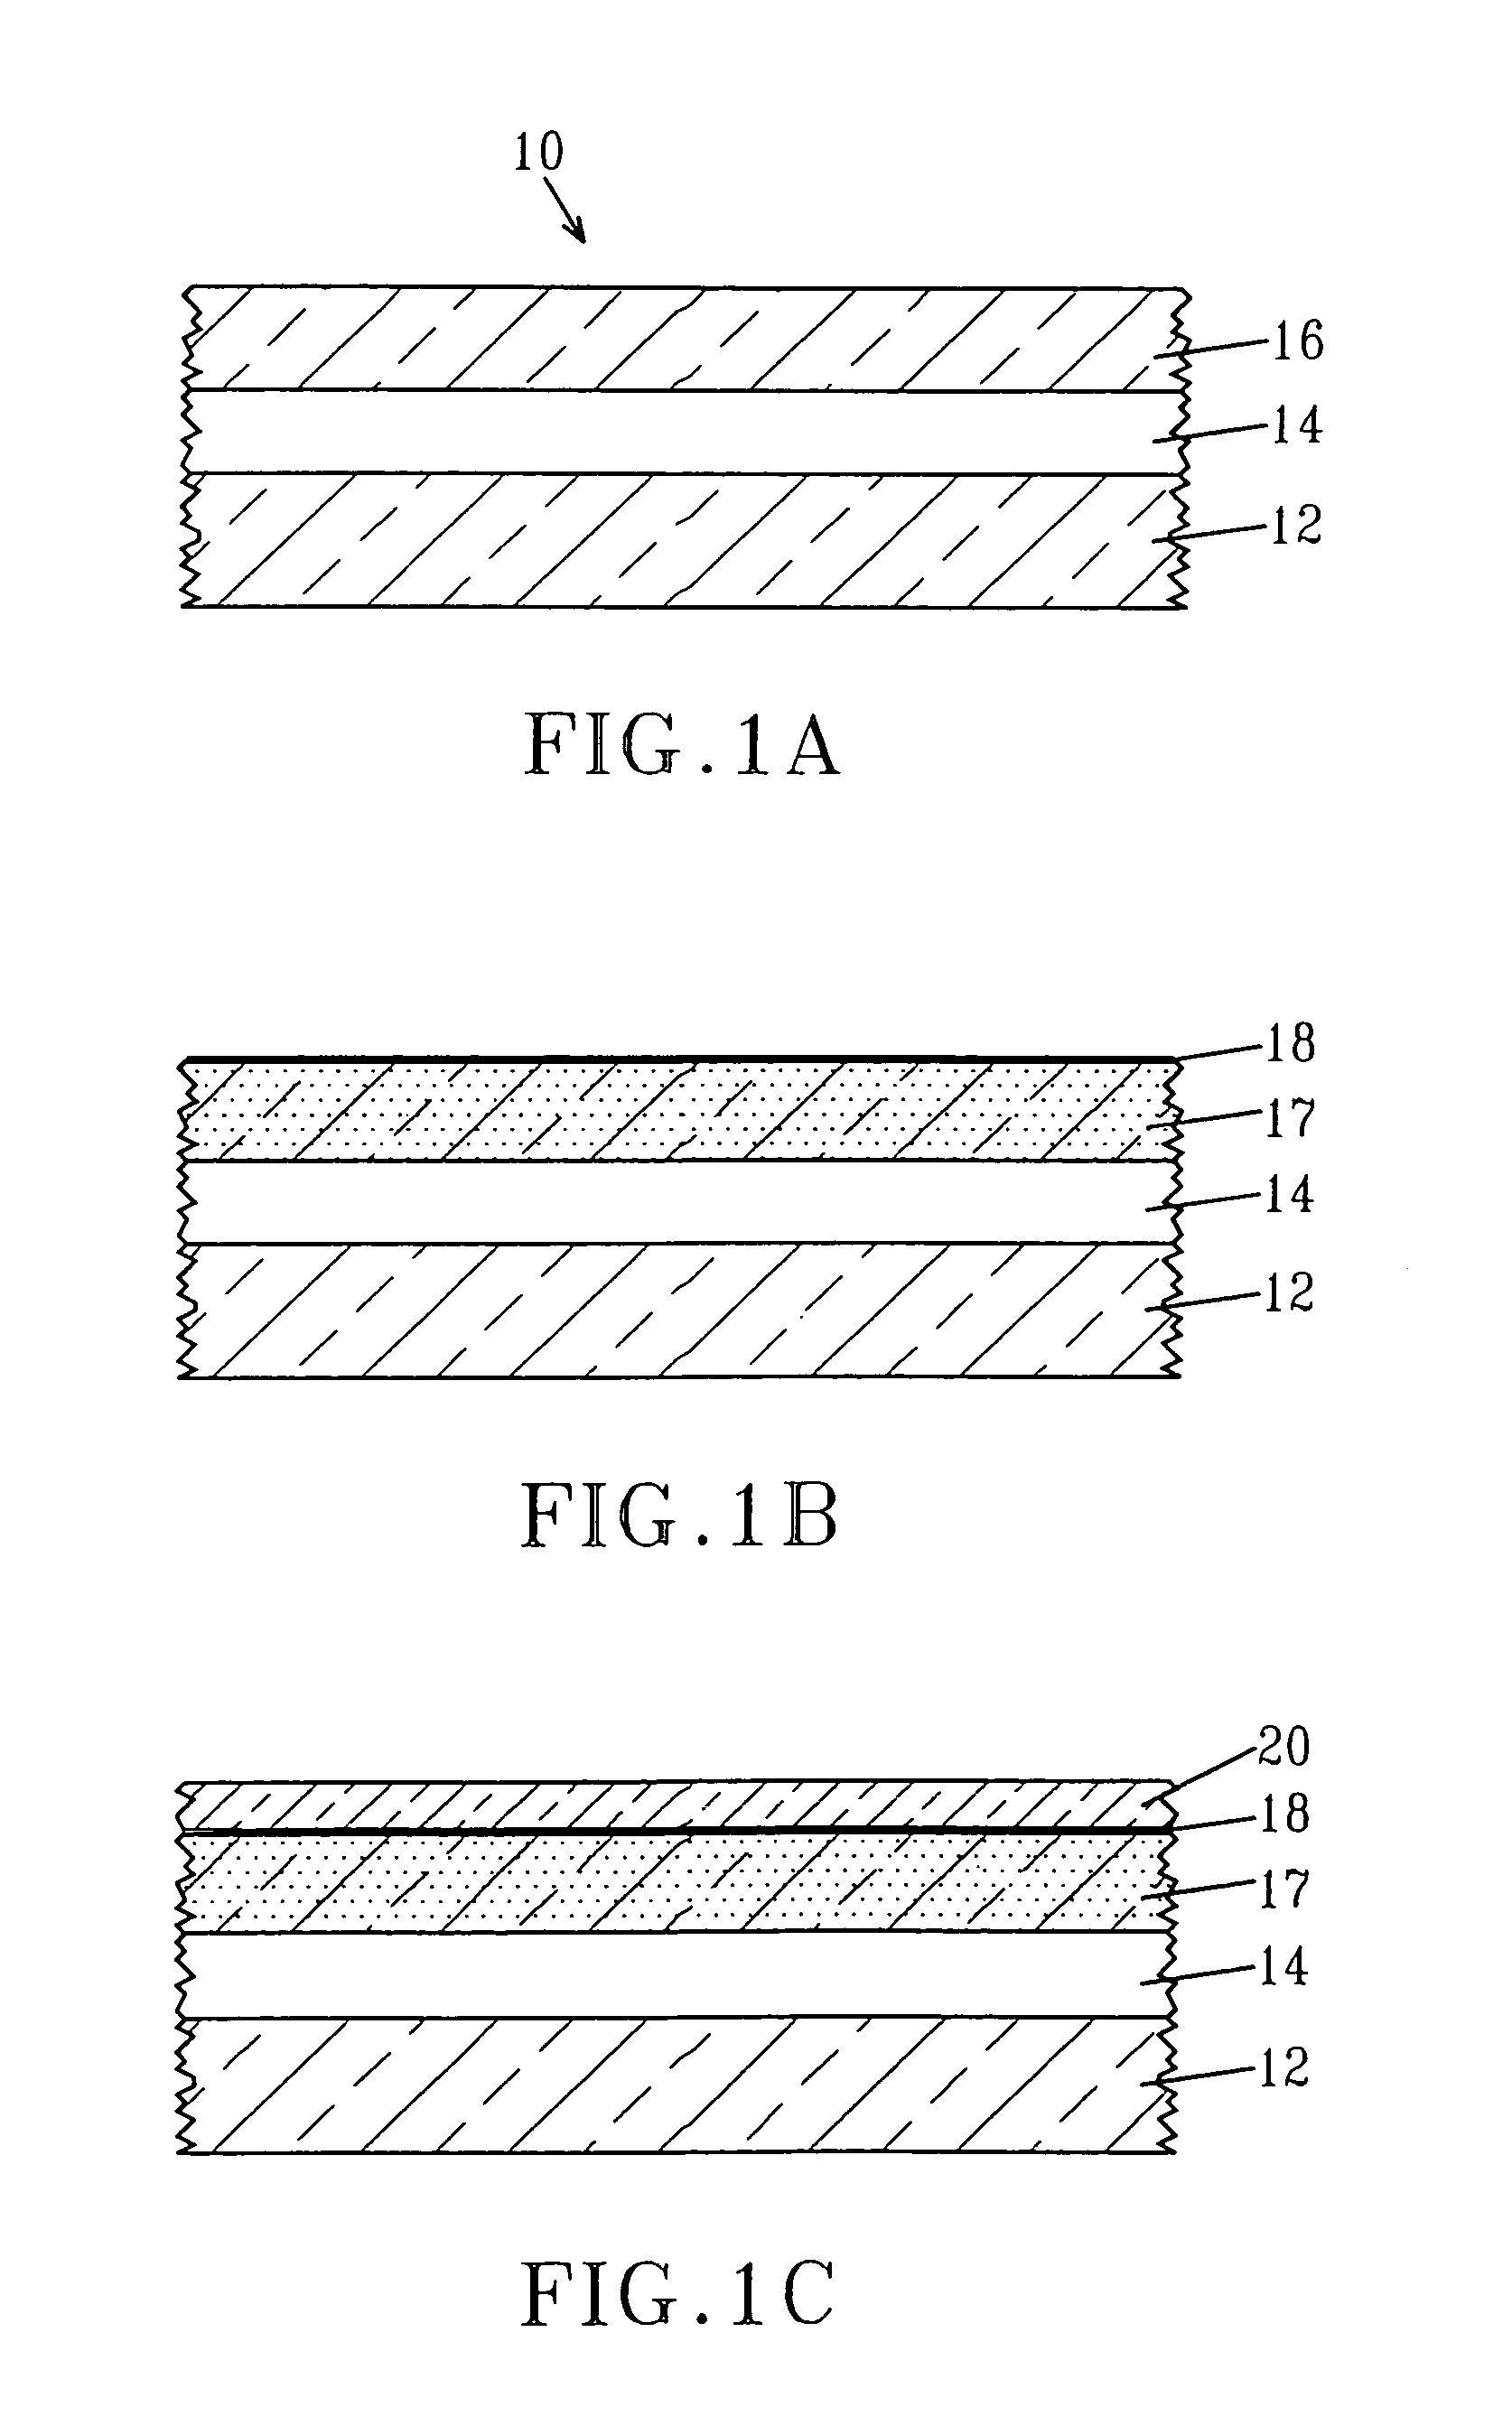 Semiconductor device having a strained raised source/drain